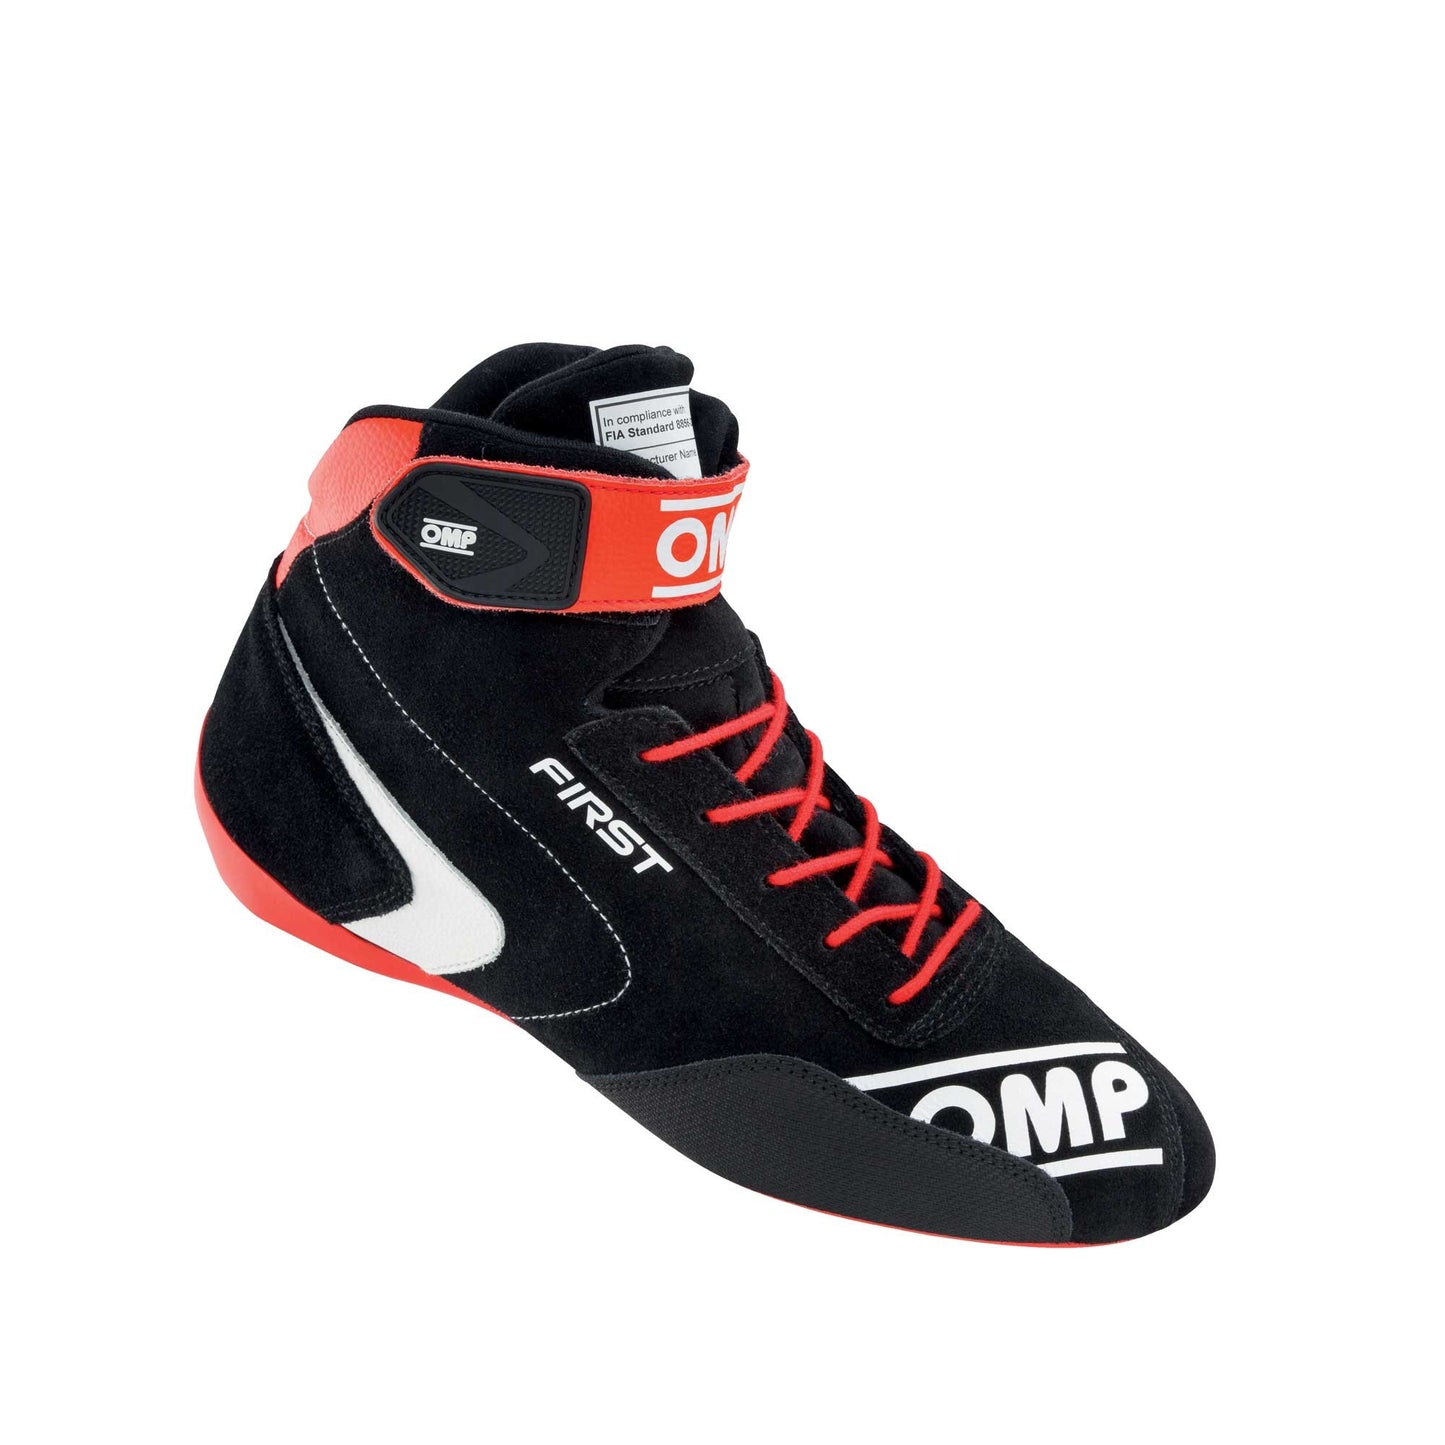 OMP Racing First(2020) Driving Shoes